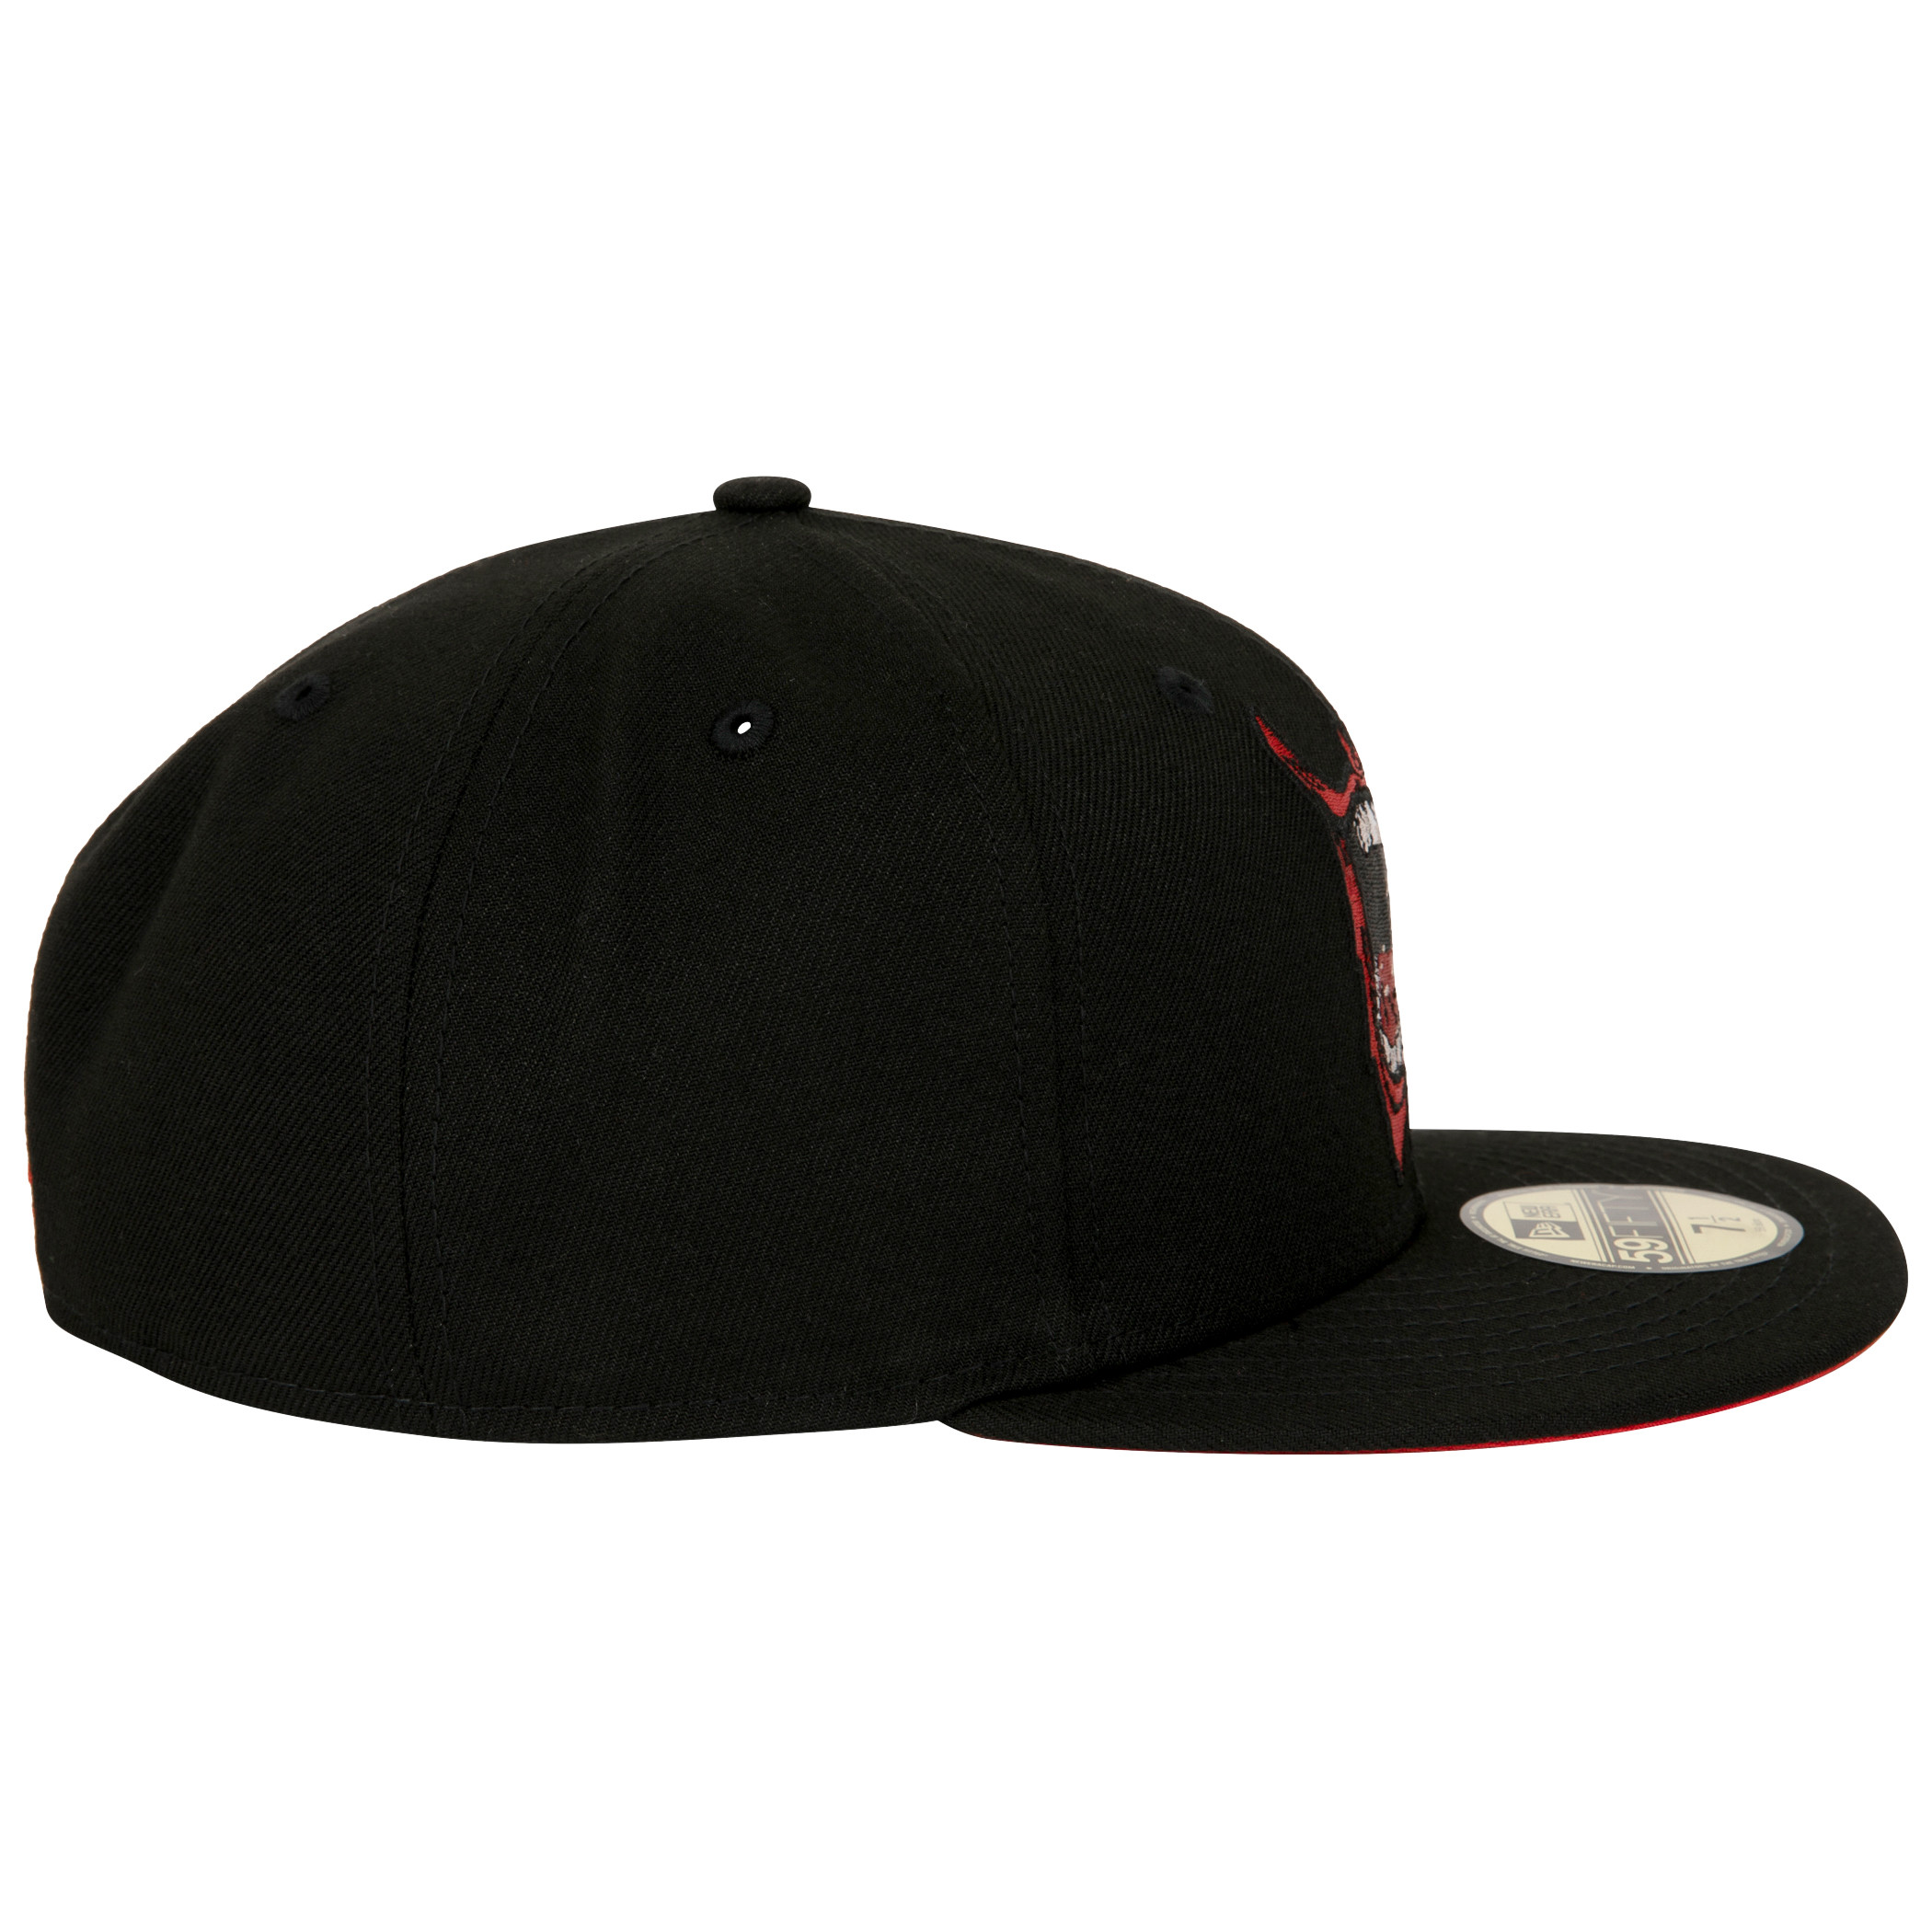 Joker He Who Laughs New Era 59Fifty Fitted Hat